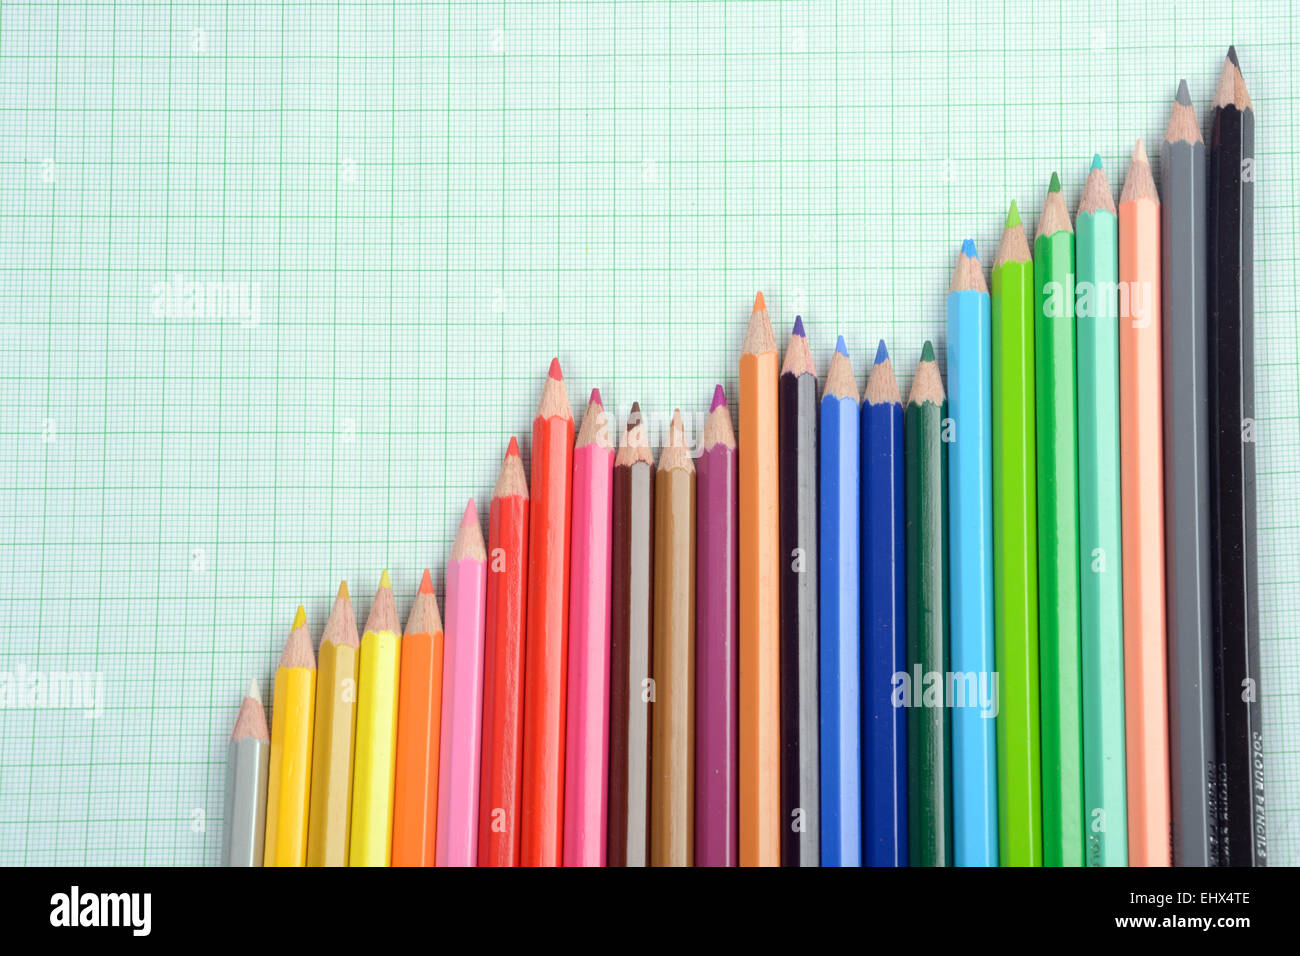 Pencils in a graph shape Stock Photo